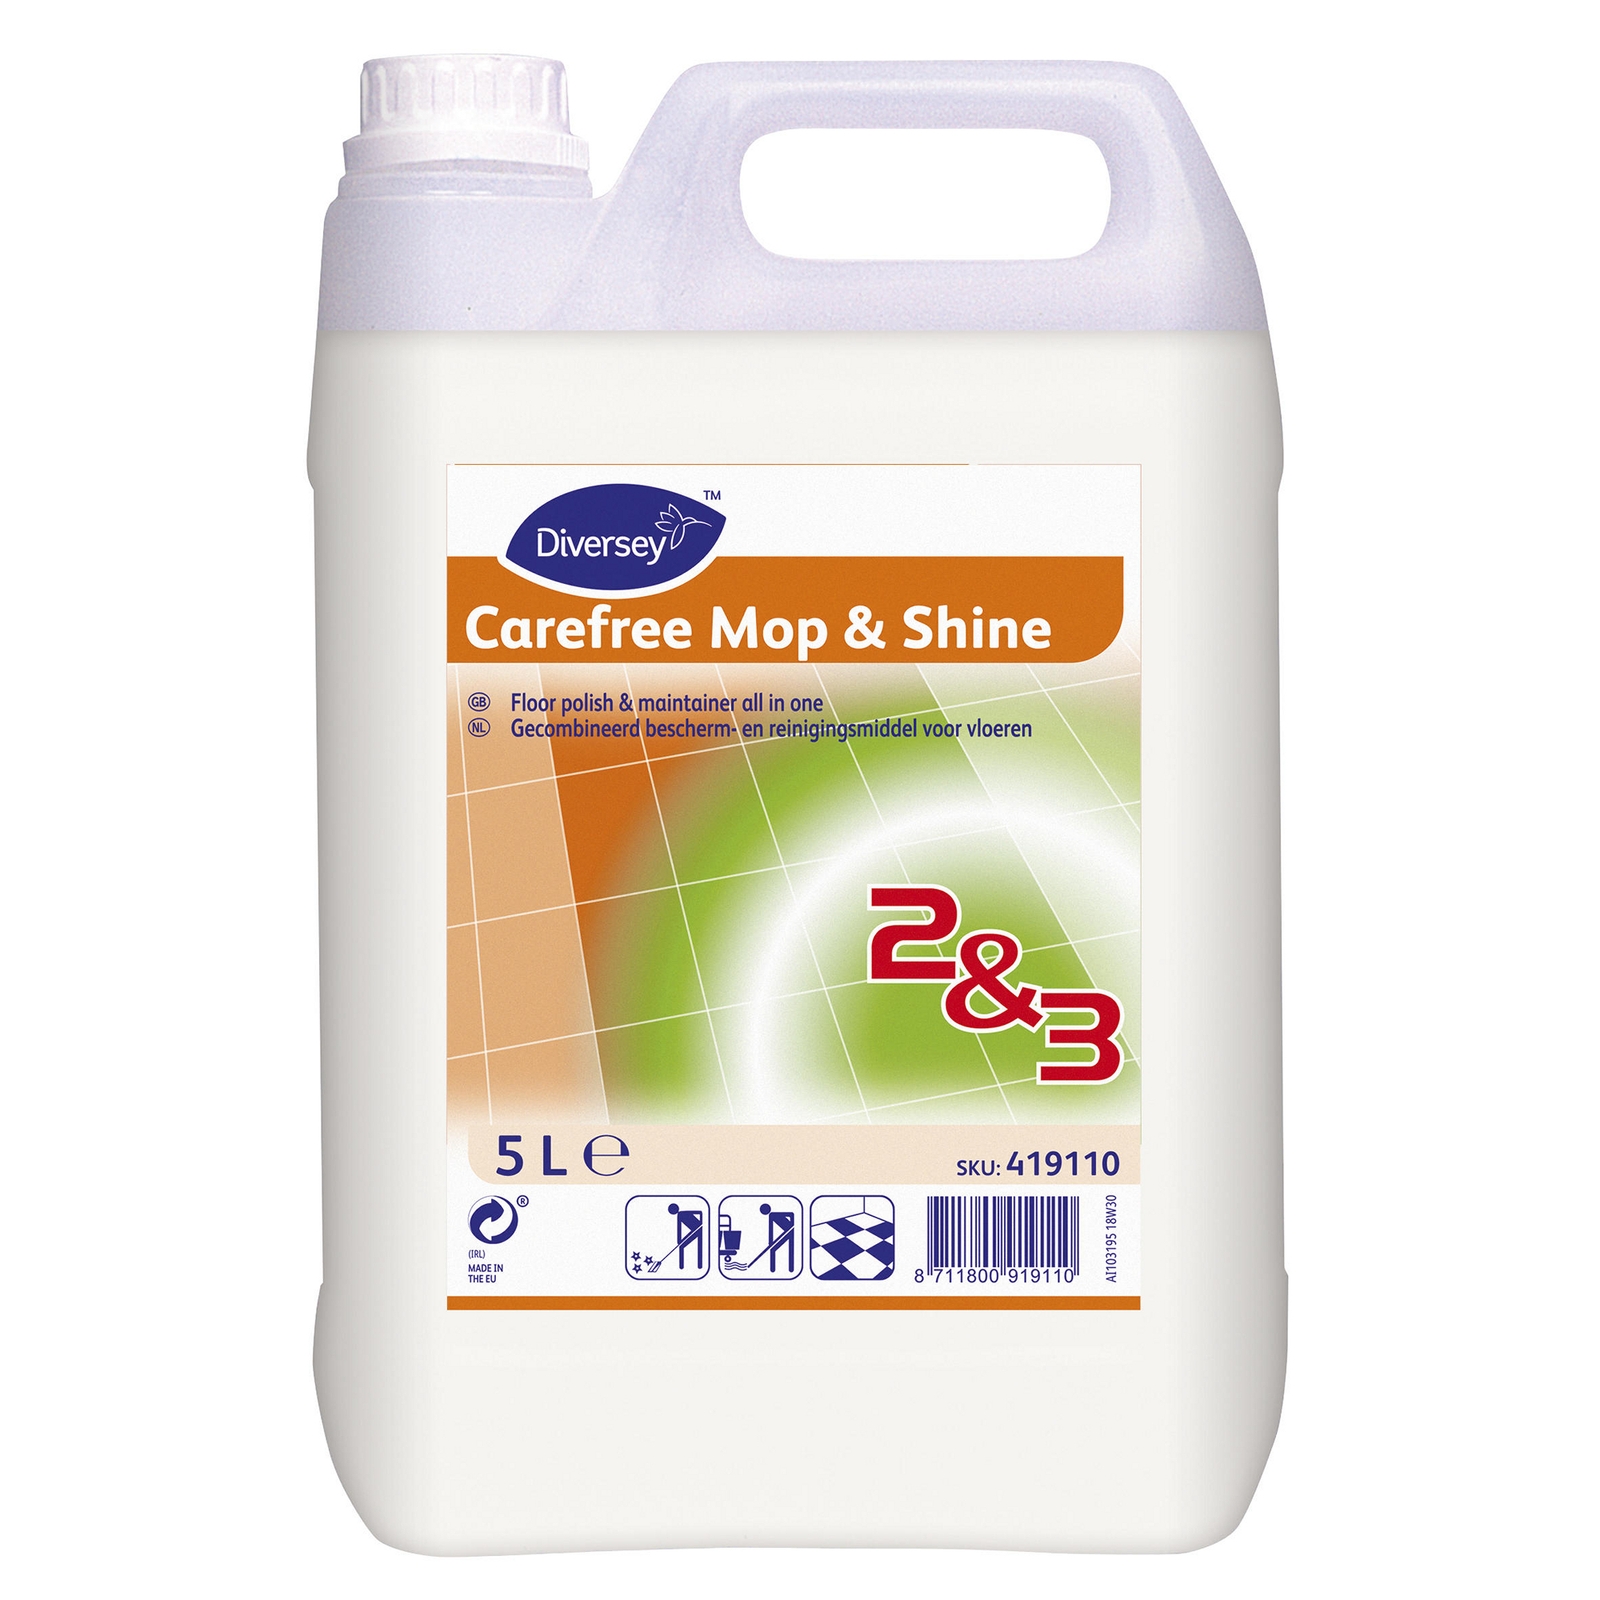 Carefree Mop and Shine Polish and Maintainer